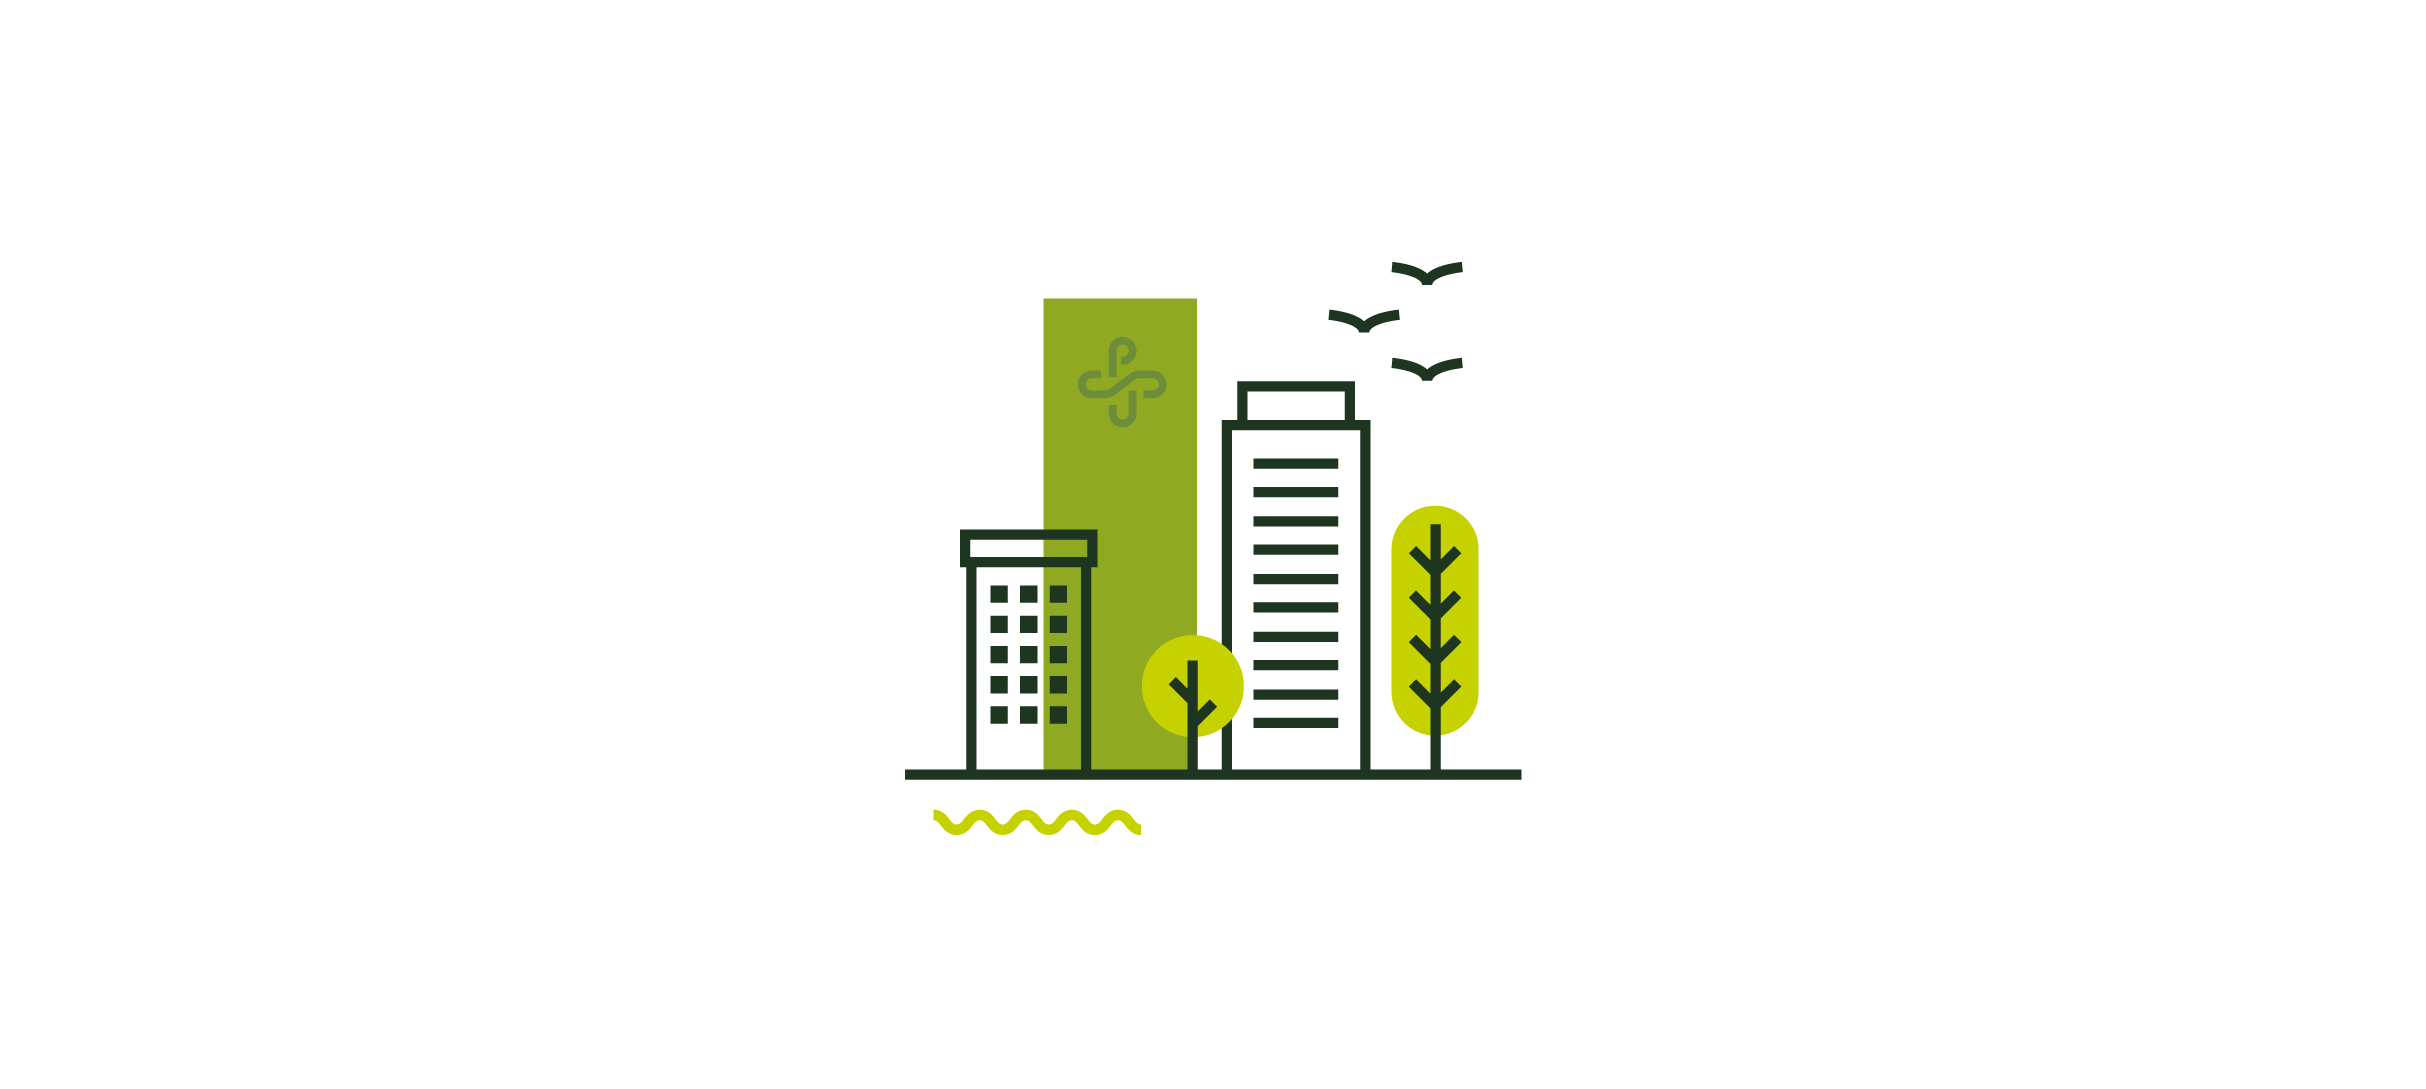 Illustrated buildings and trees icon